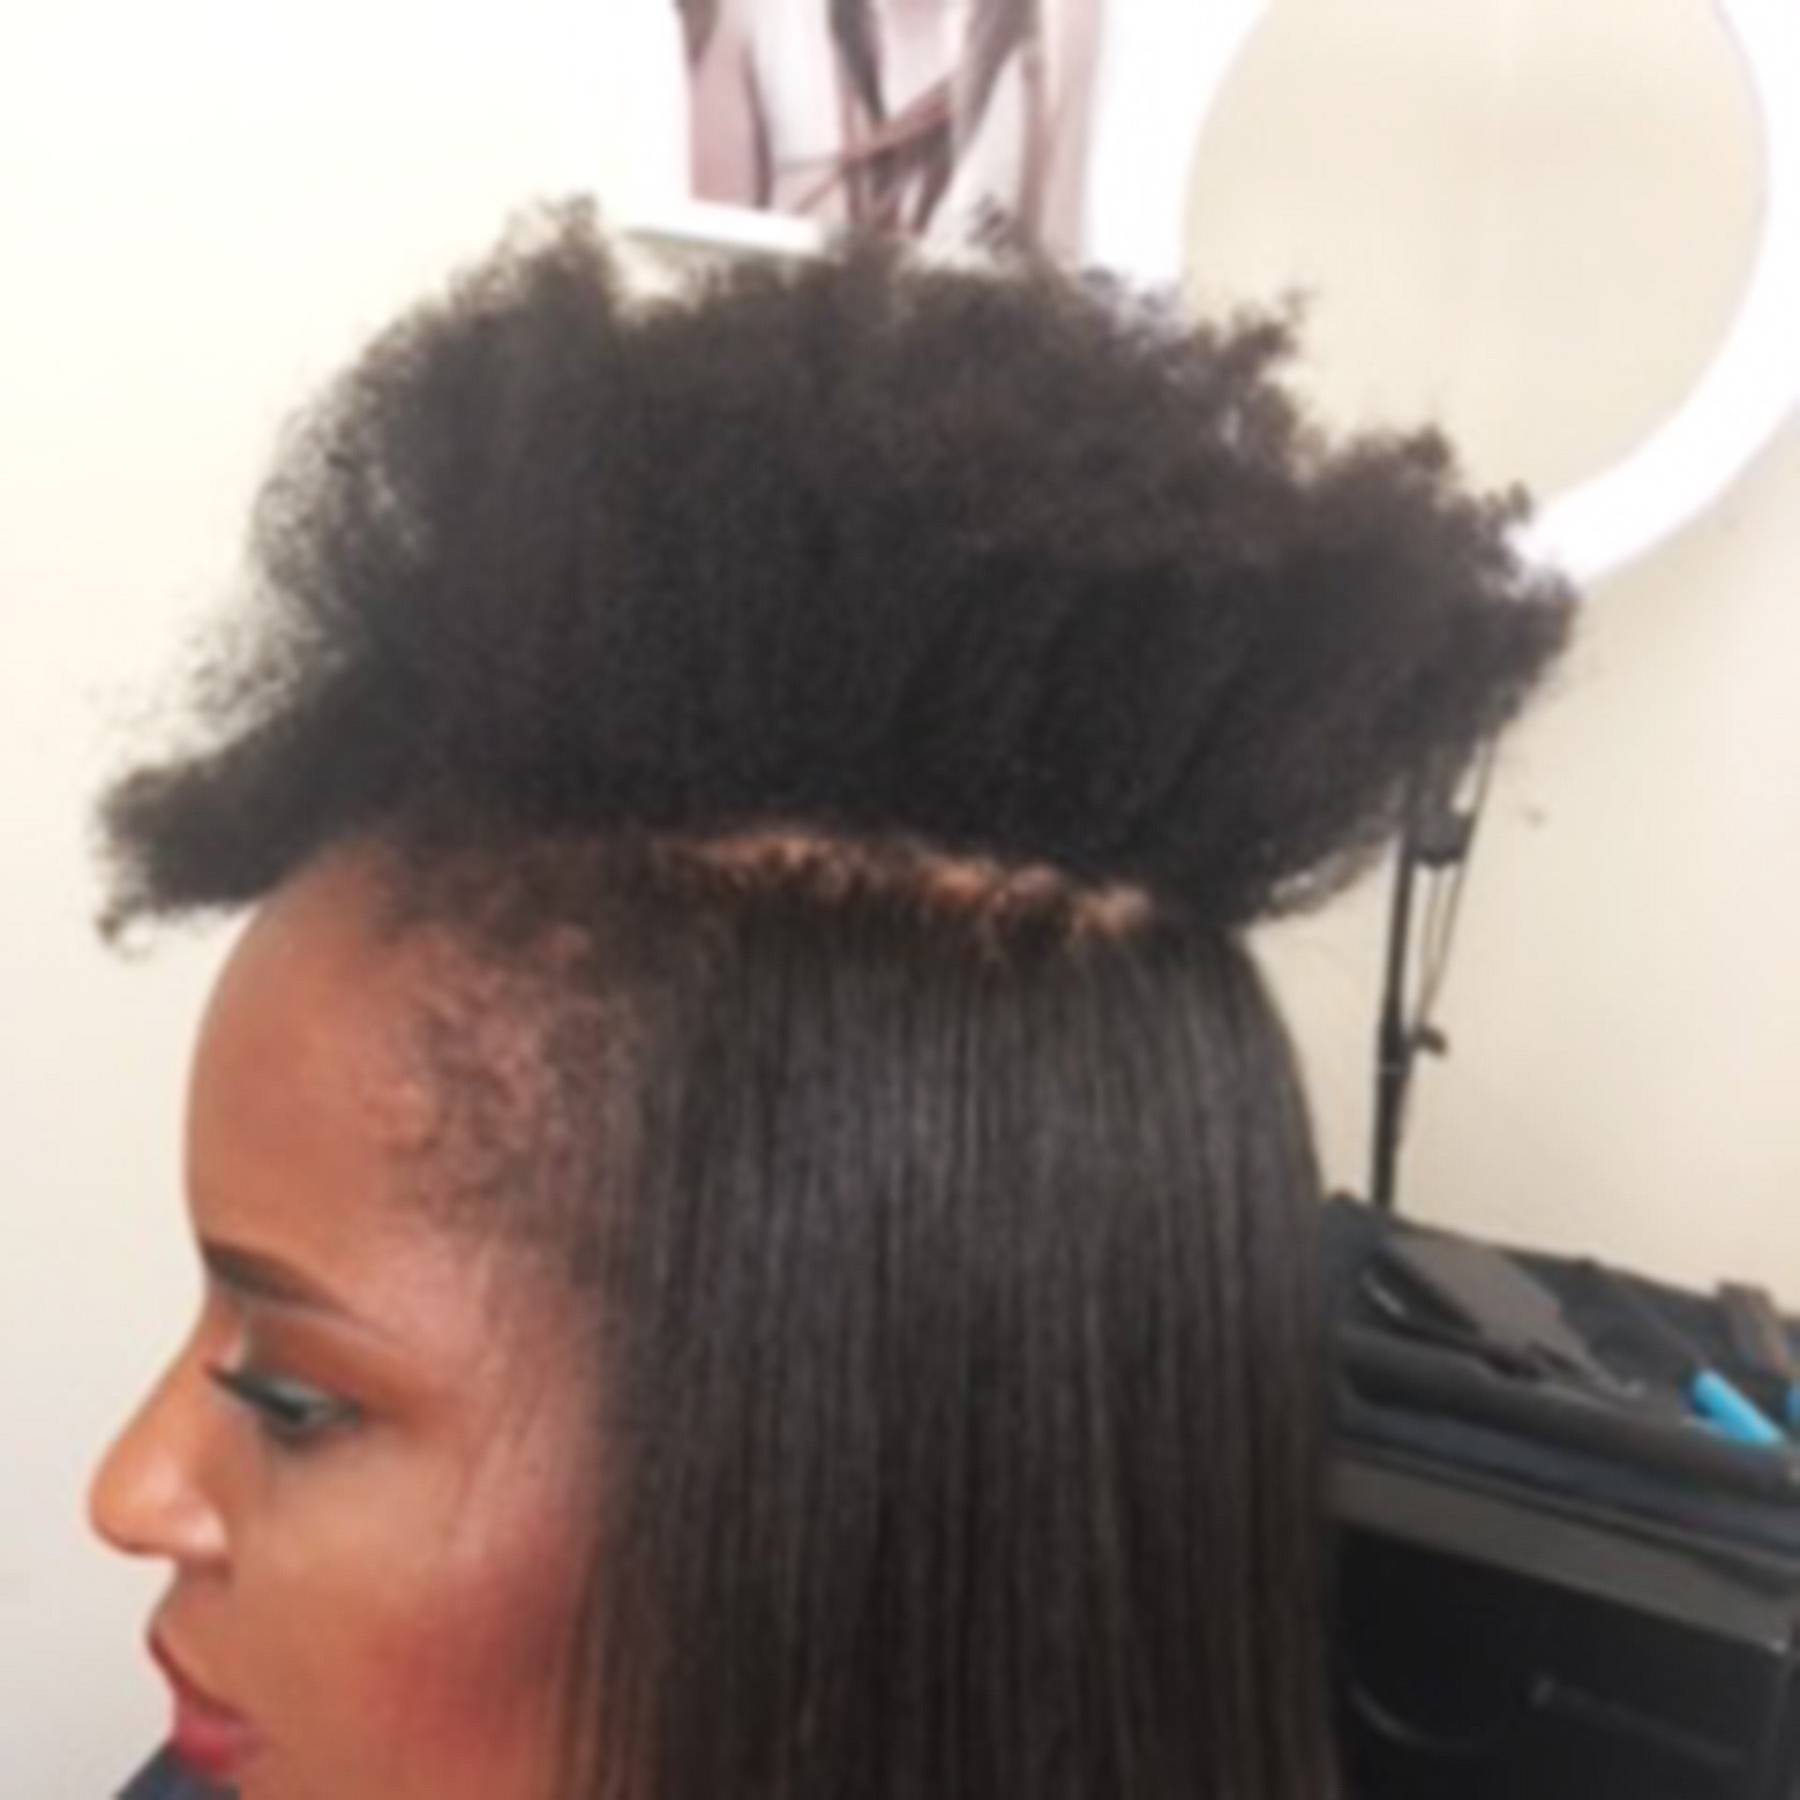 Keratin Treatment For Afro Hair Review Brazilian Blow Dry On Afro Hair Glamour Uk